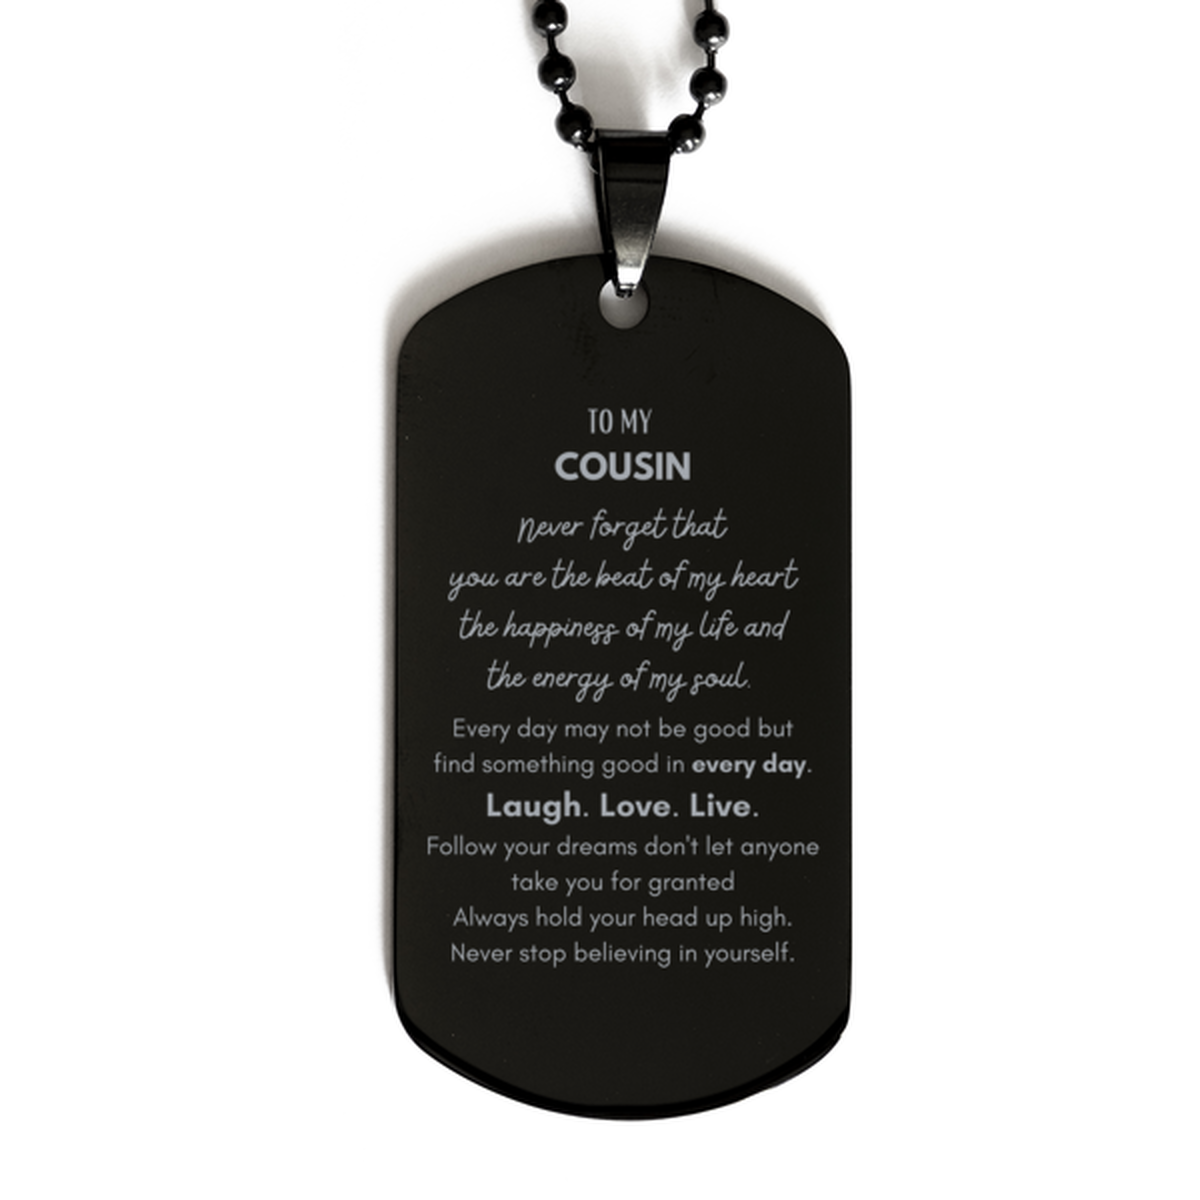 To My Cousin Dogtag Gifts, Christmas Cousin Black Dog Tag Present, Birthday Unique Motivational For Cousin, To My Cousin Never forget that you are the beat of my heart the happiness of my life and the energy of my soul